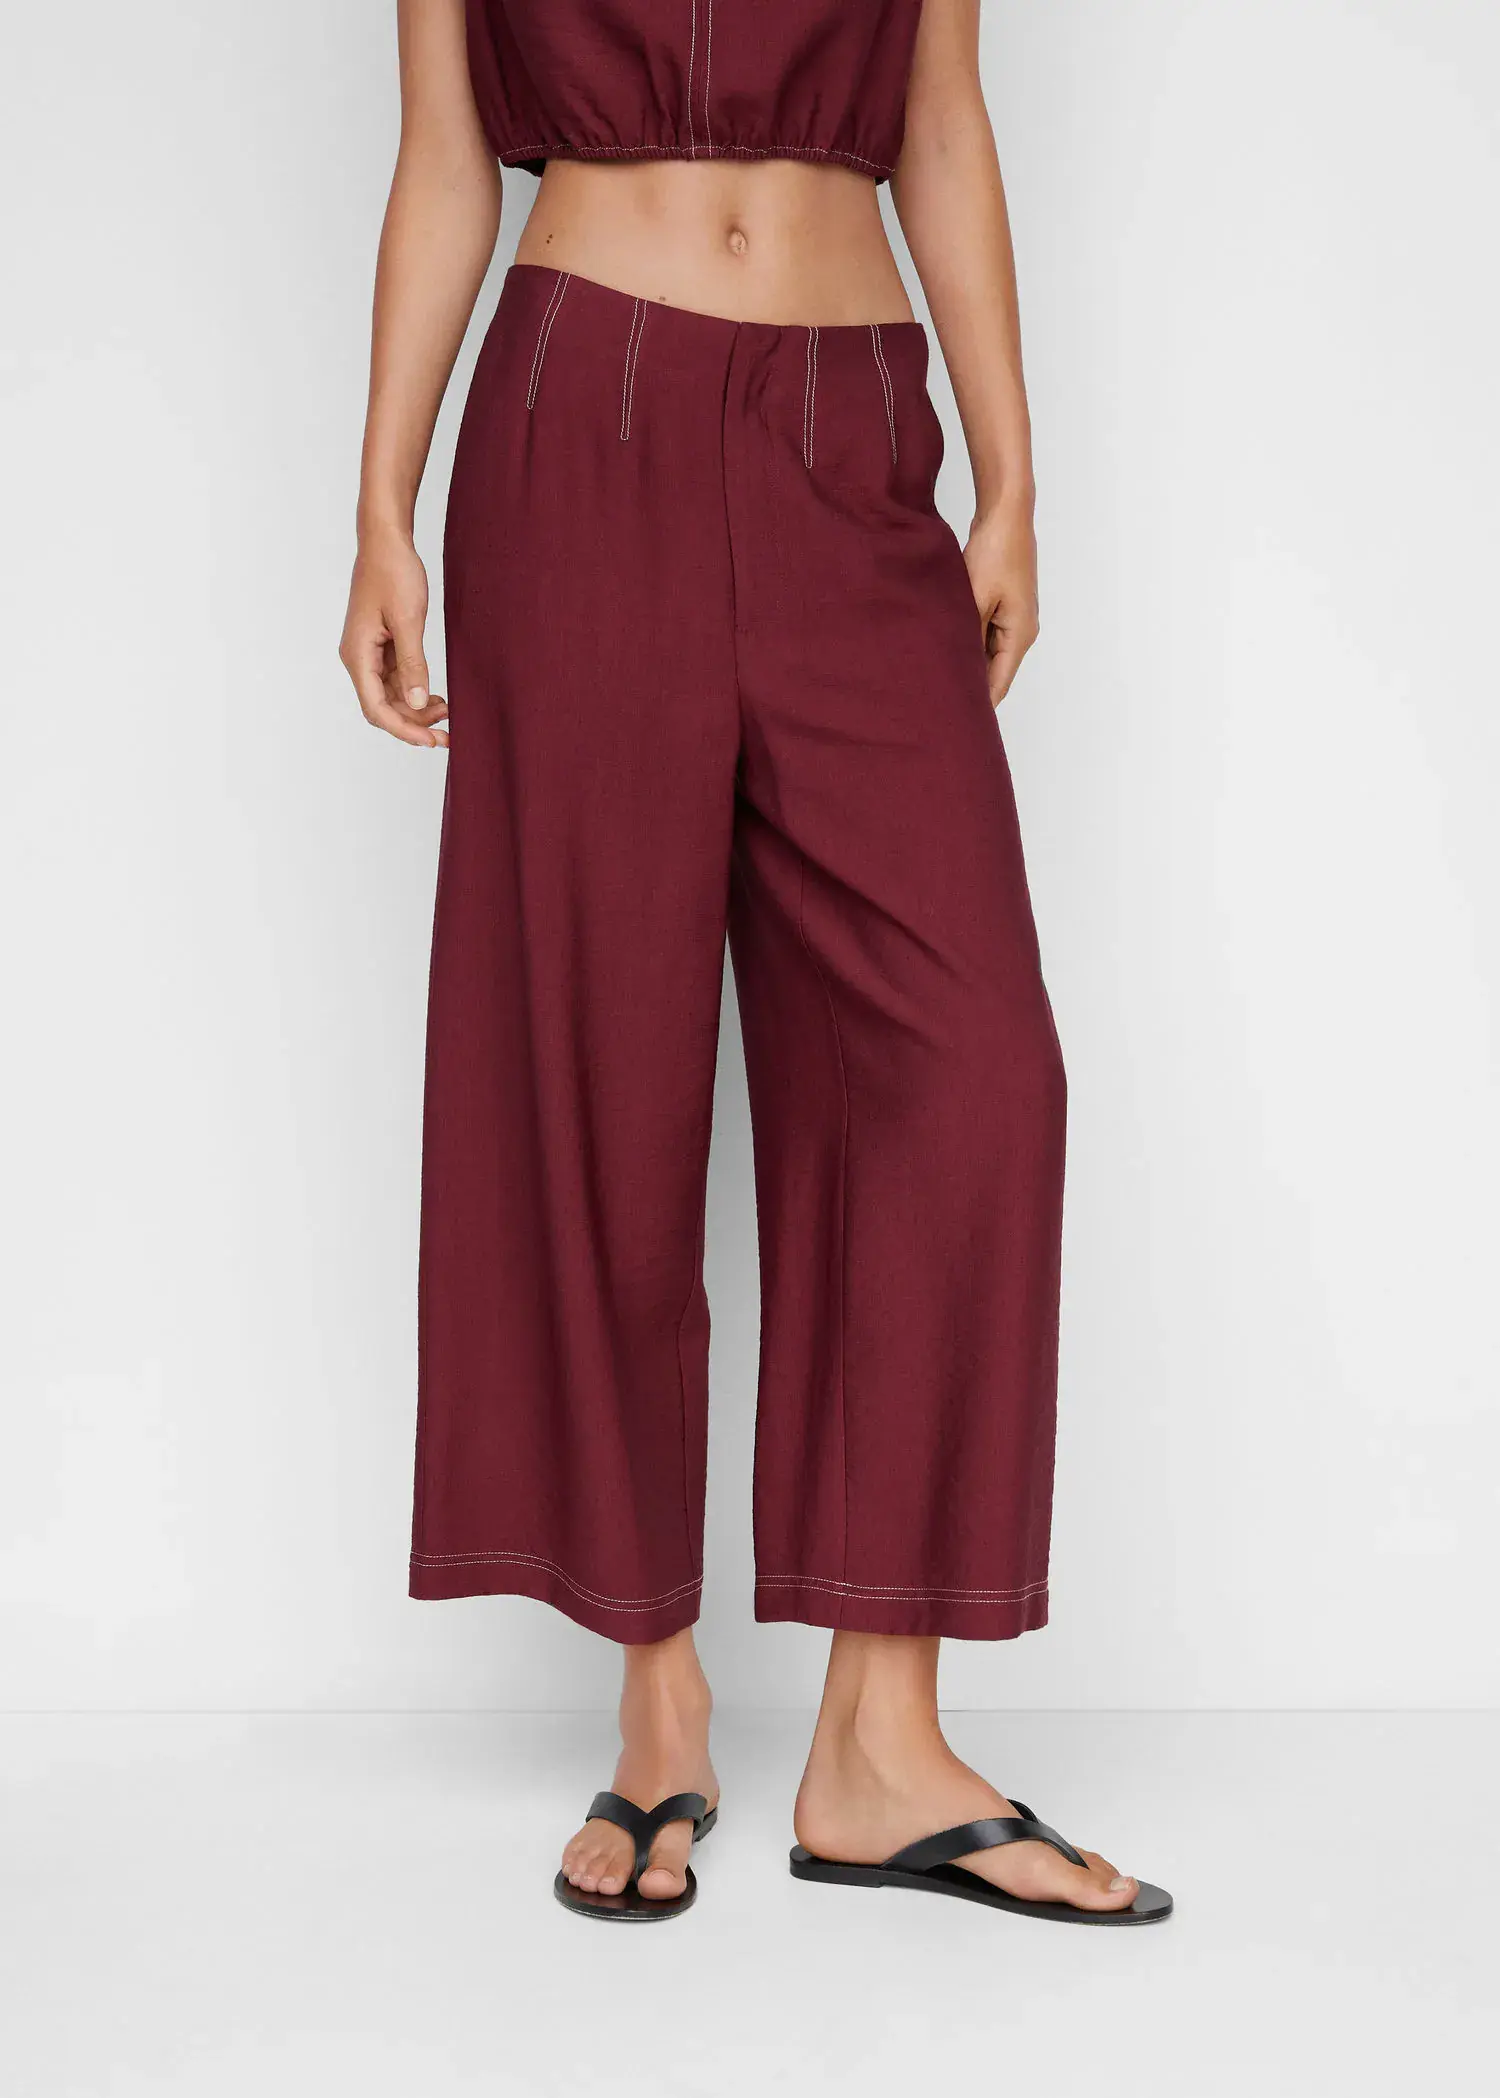 Mango Jupe-culotte coutures. 2